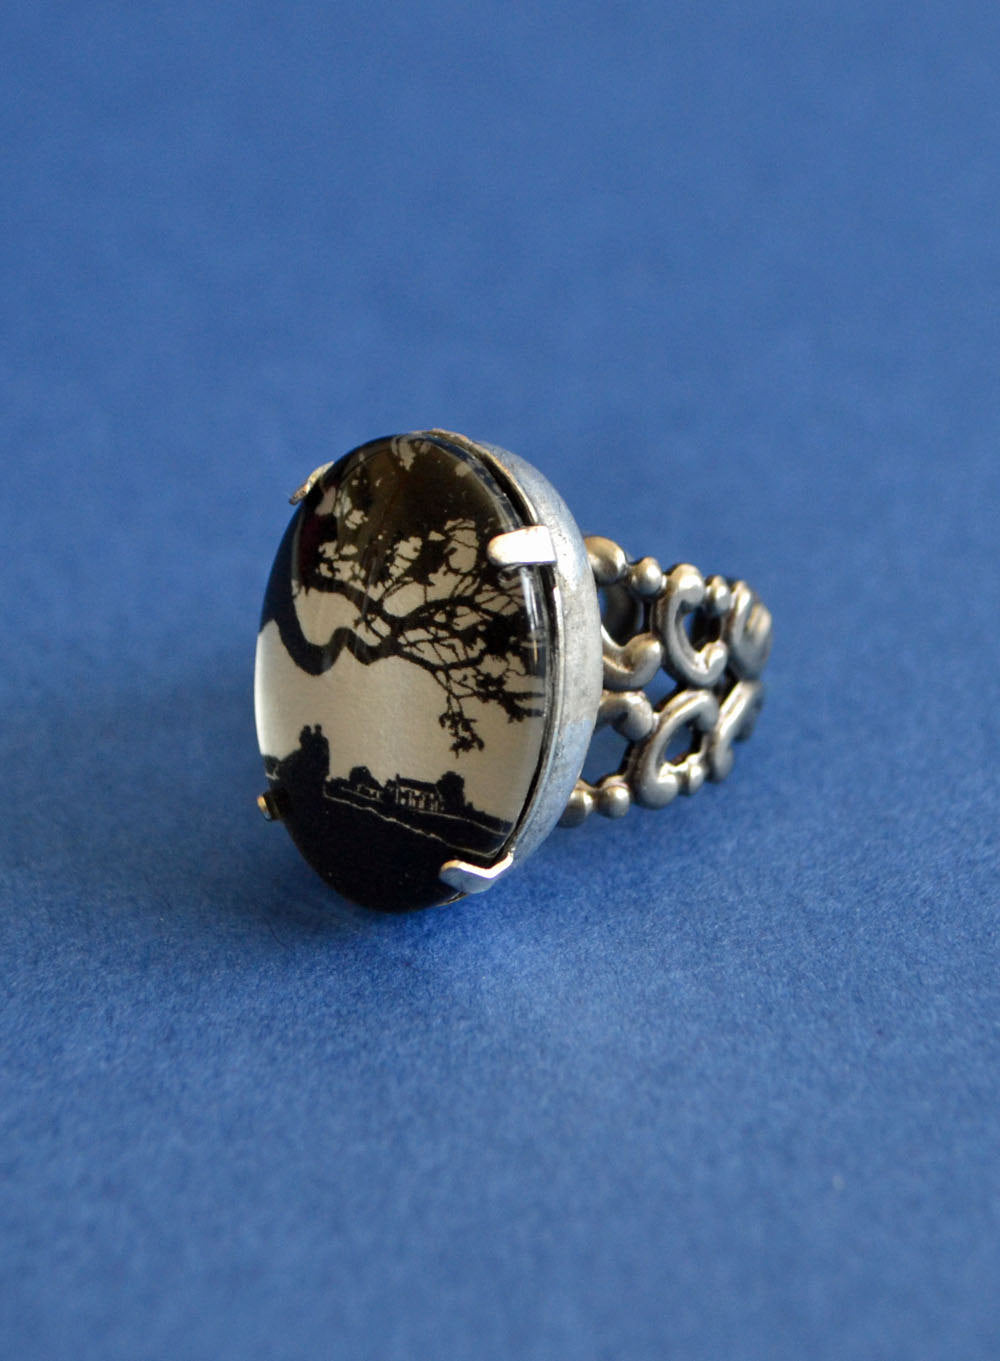 GONE WITH the WIND Ring - Silhouette Jewelry